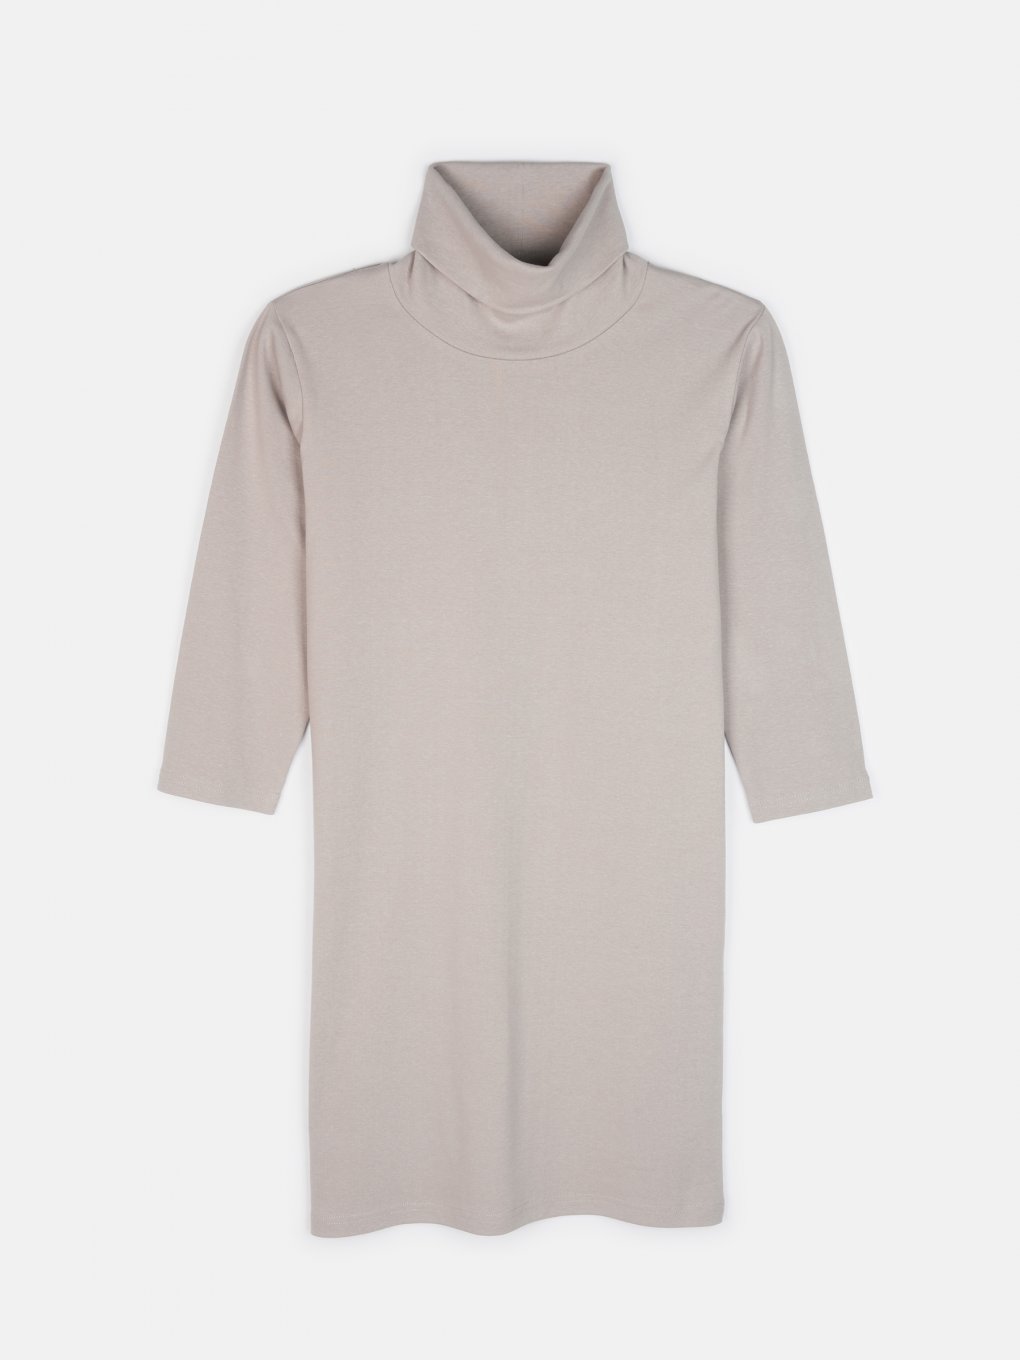 T-shirt dress with roll neck